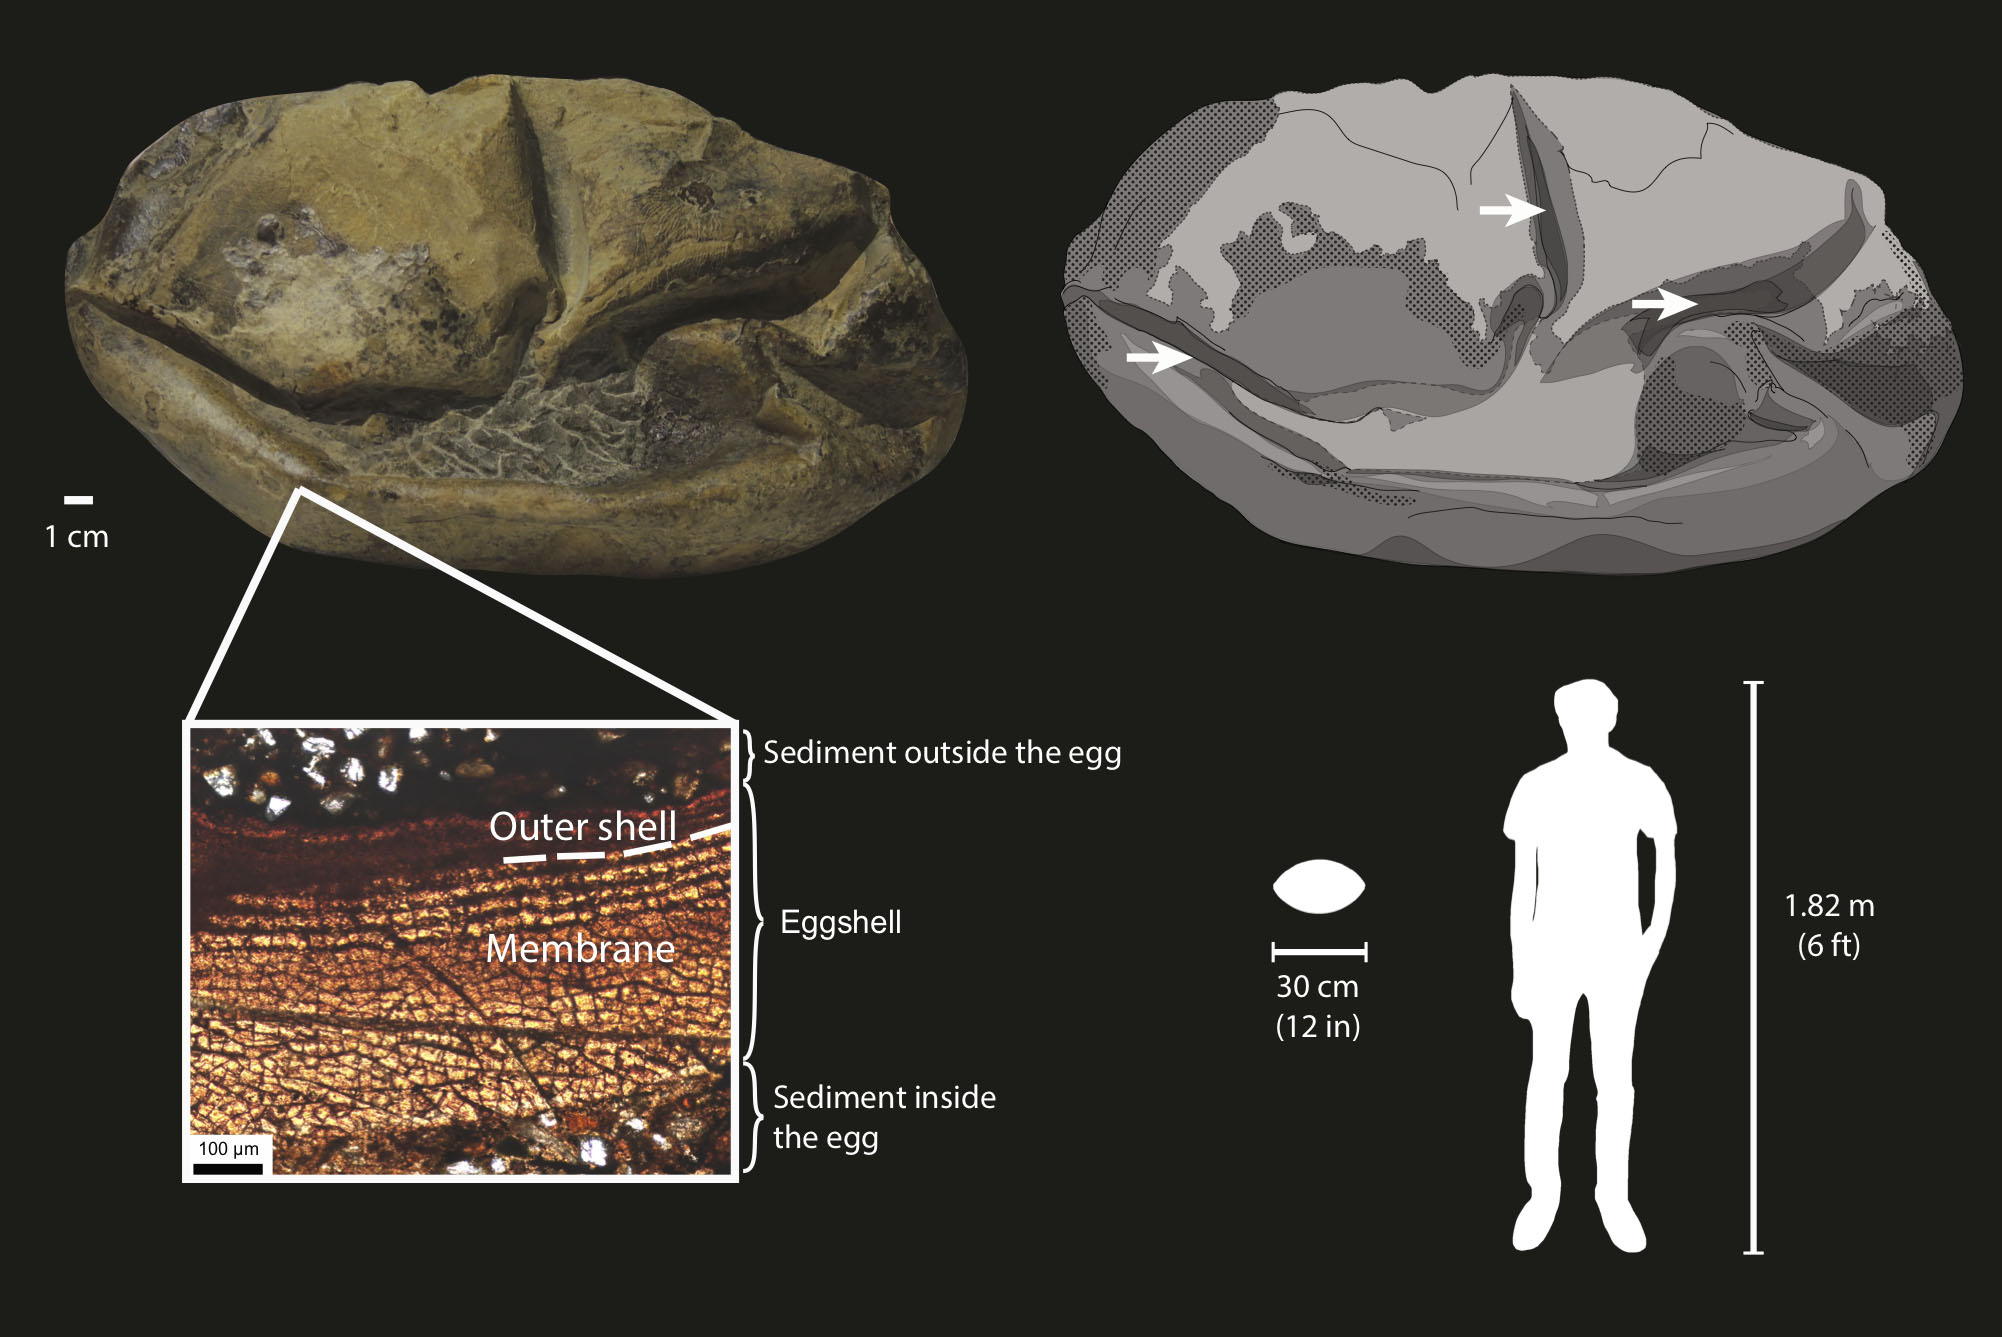 Early dinosaur eggs may have been 'soft like a turtle's,' study says